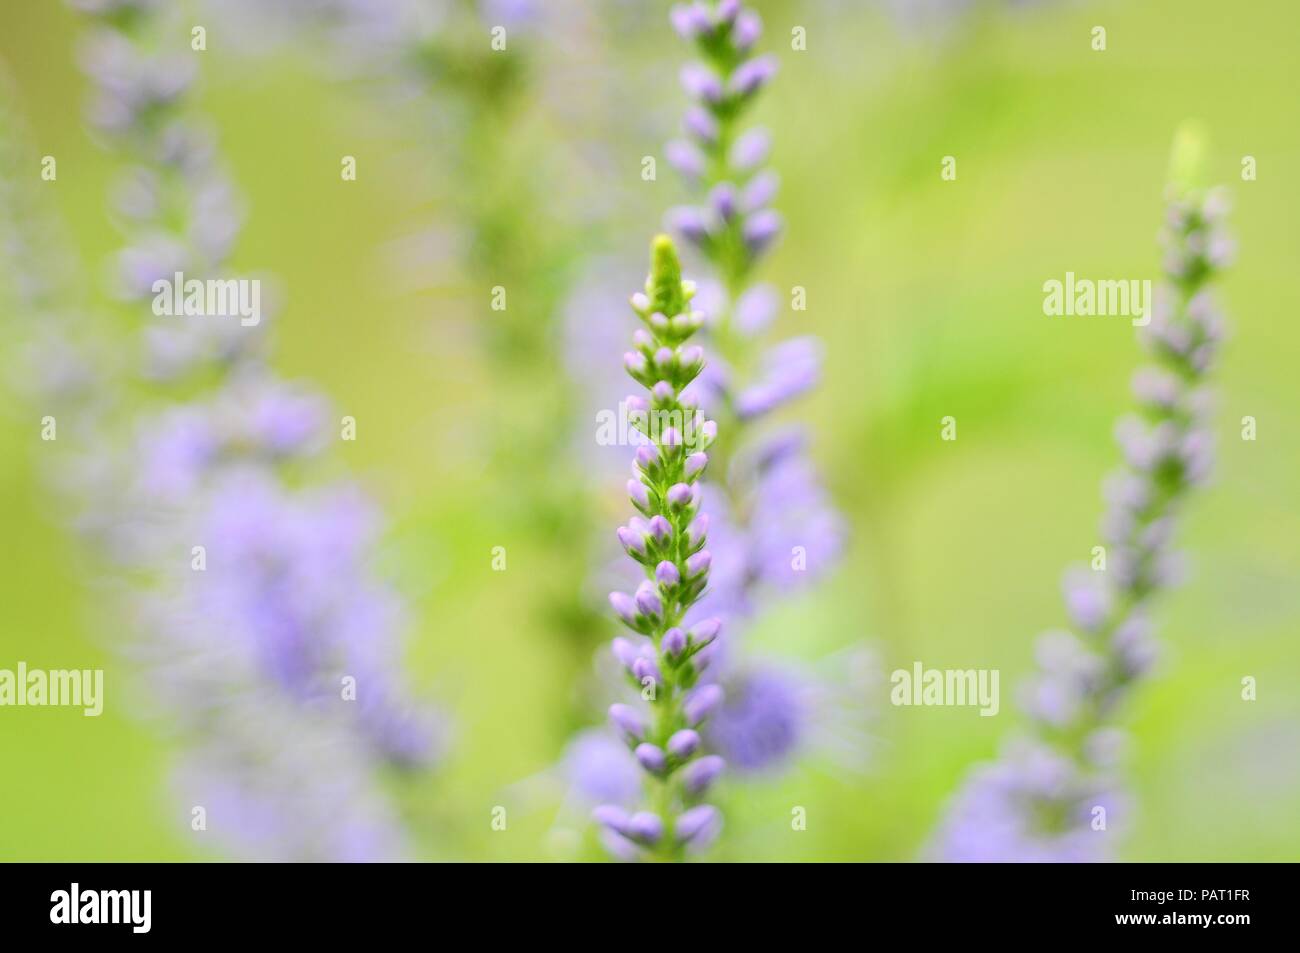 Stems Of Field Plants With Small Light Purple Flowers Macro Stock Photo Alamy,Home Screen Black And White Wallpaper Hd For Mobile